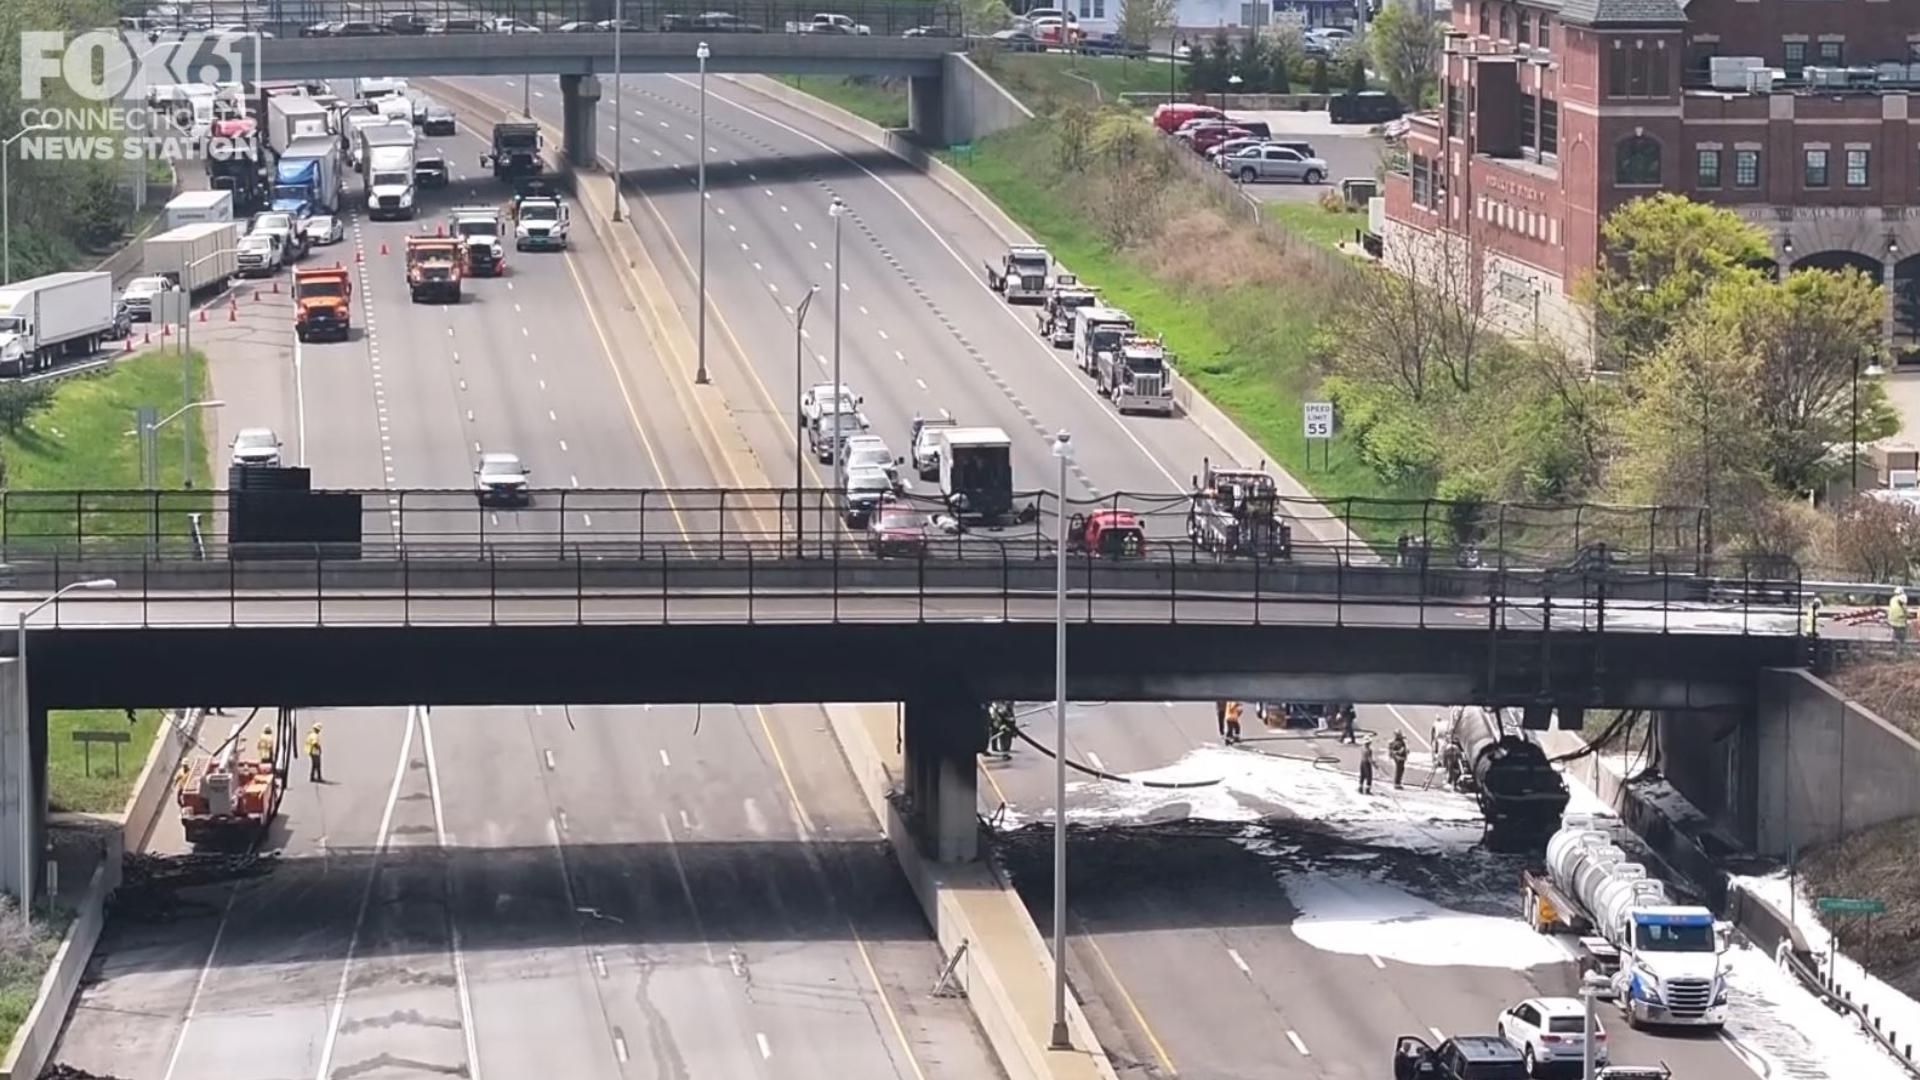 Sky61 captured footage of the damage and traffic that resulted from a 3-car crash involving a tractor-trailer and a fuel tanker on I-95 in Norwalk.